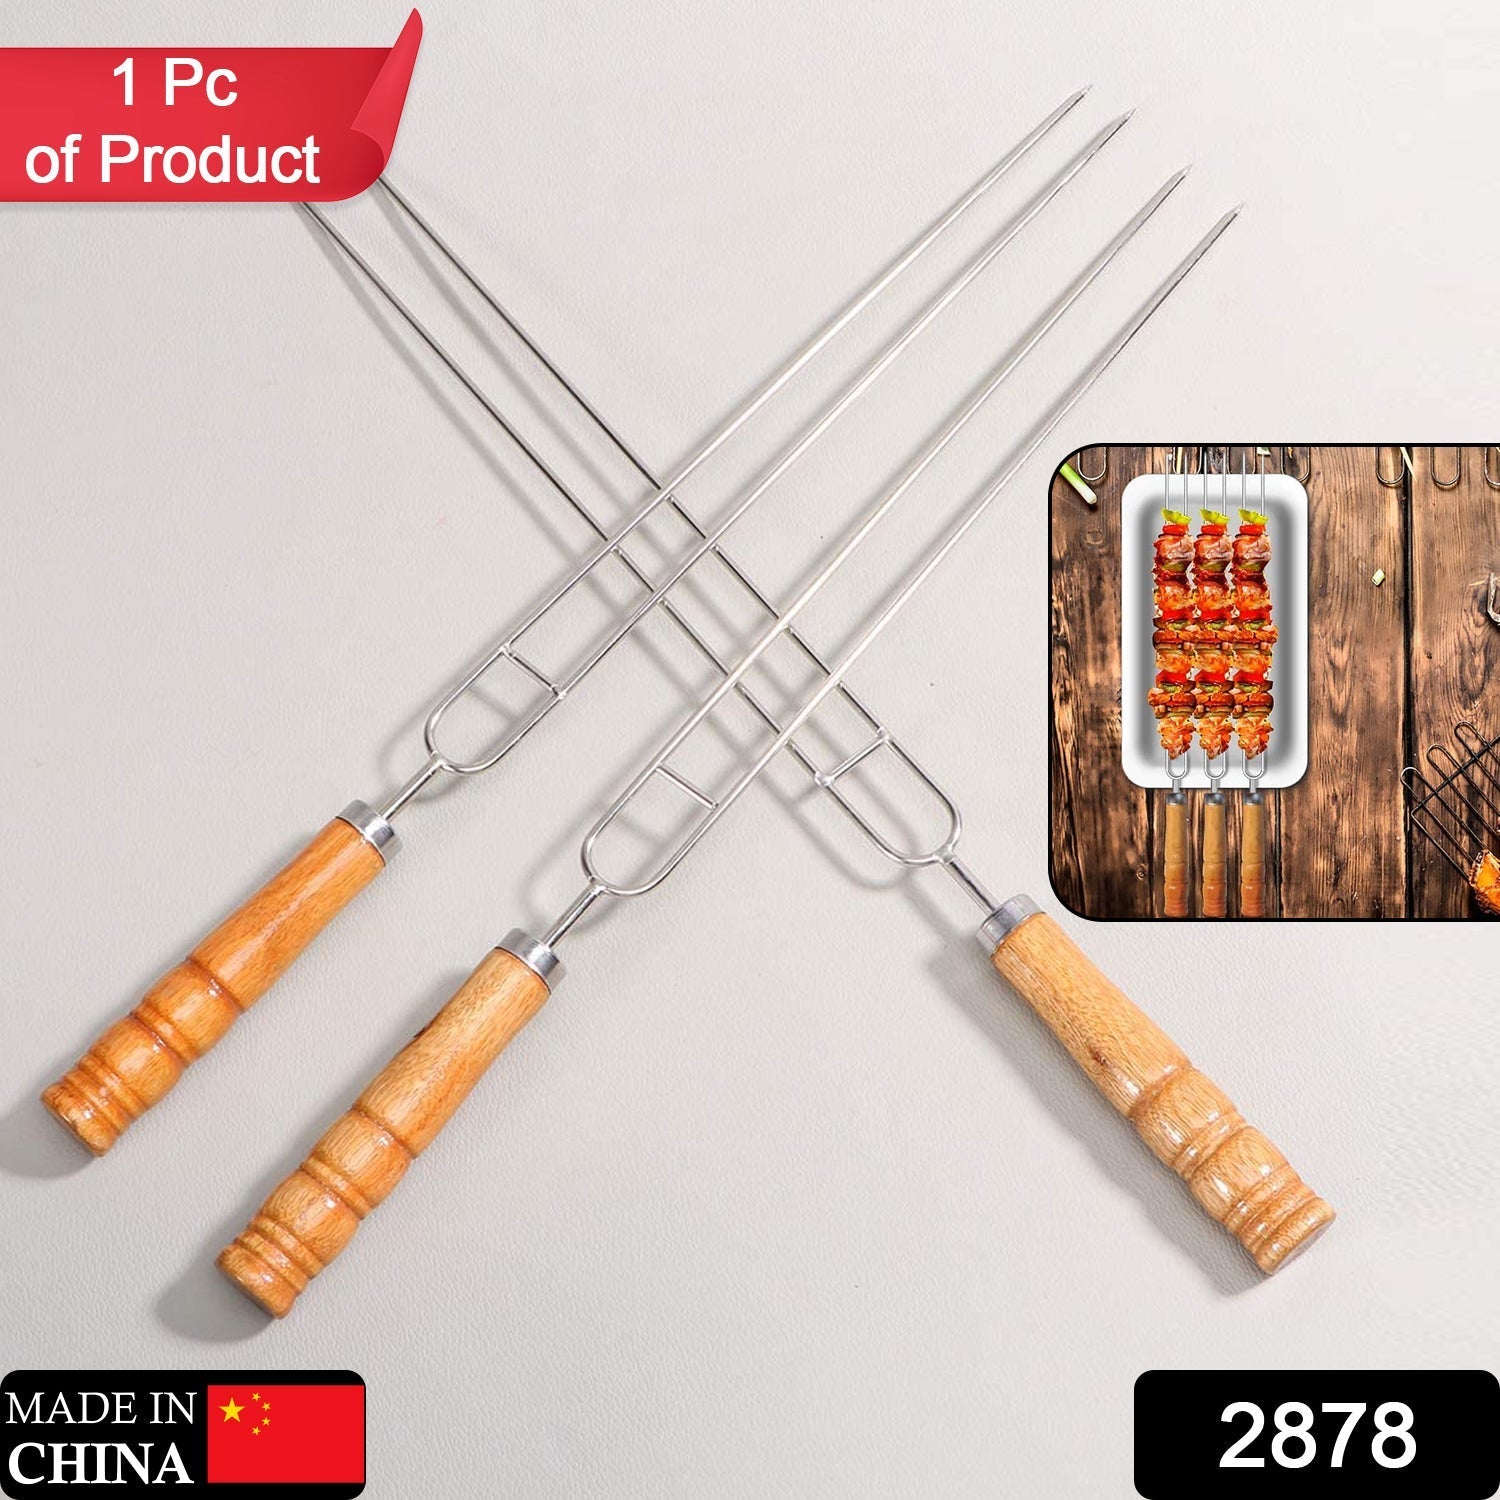 2878 Stainless Steel Double Prongs Roasting Stick BBQ Barbecue Fork Kebab Skewers Wooden Handle DeoDap